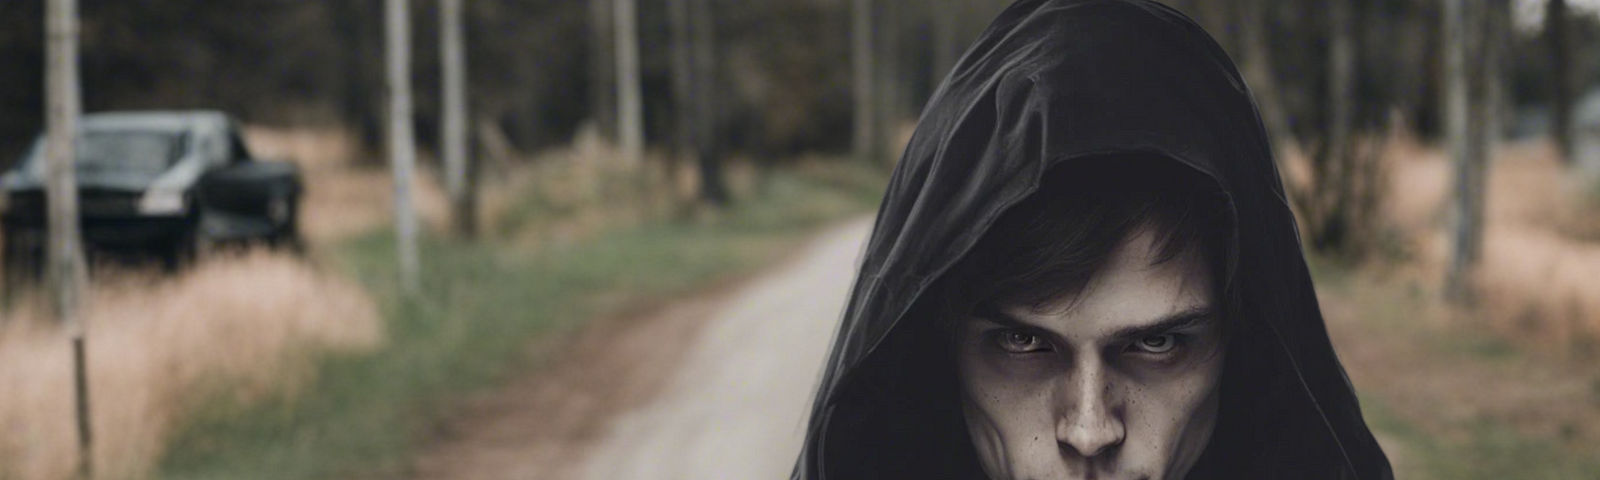 Creepy young man in a hoodie on a rural street